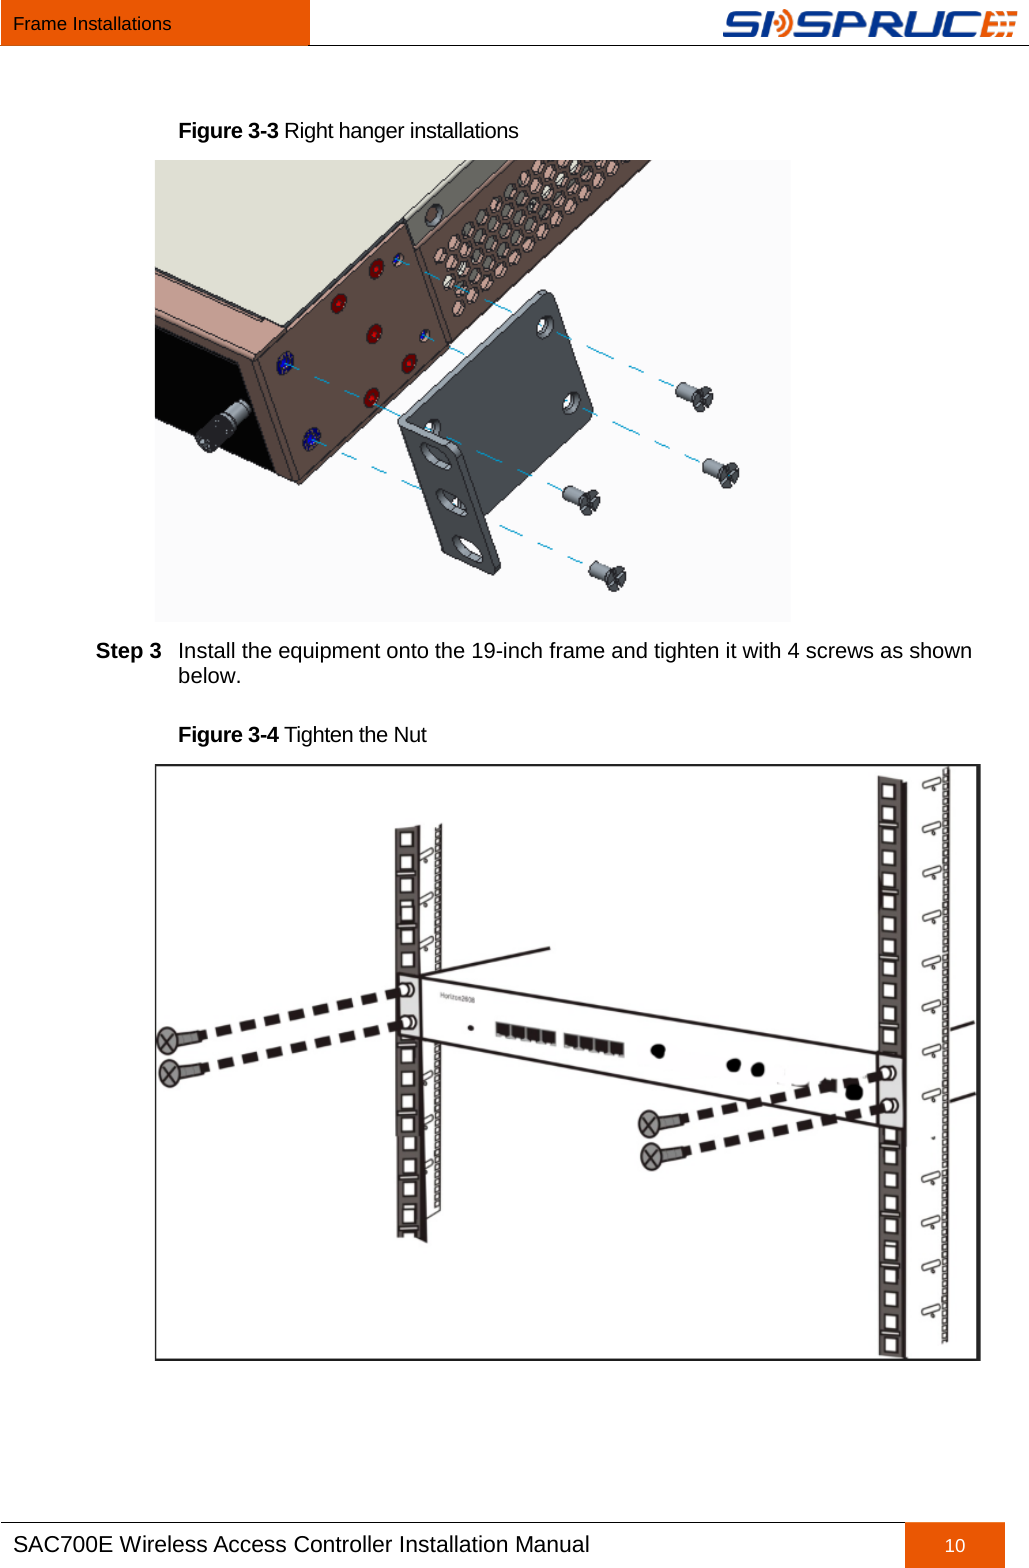 Frame Installations   SAC700E Wireless Access Controller Installation Manual 10  Figure 3-3 Right hanger installations  Step 3 Install the equipment onto the 19-inch frame and tighten it with 4 screws as shown below. Figure 3-4 Tighten the Nut  